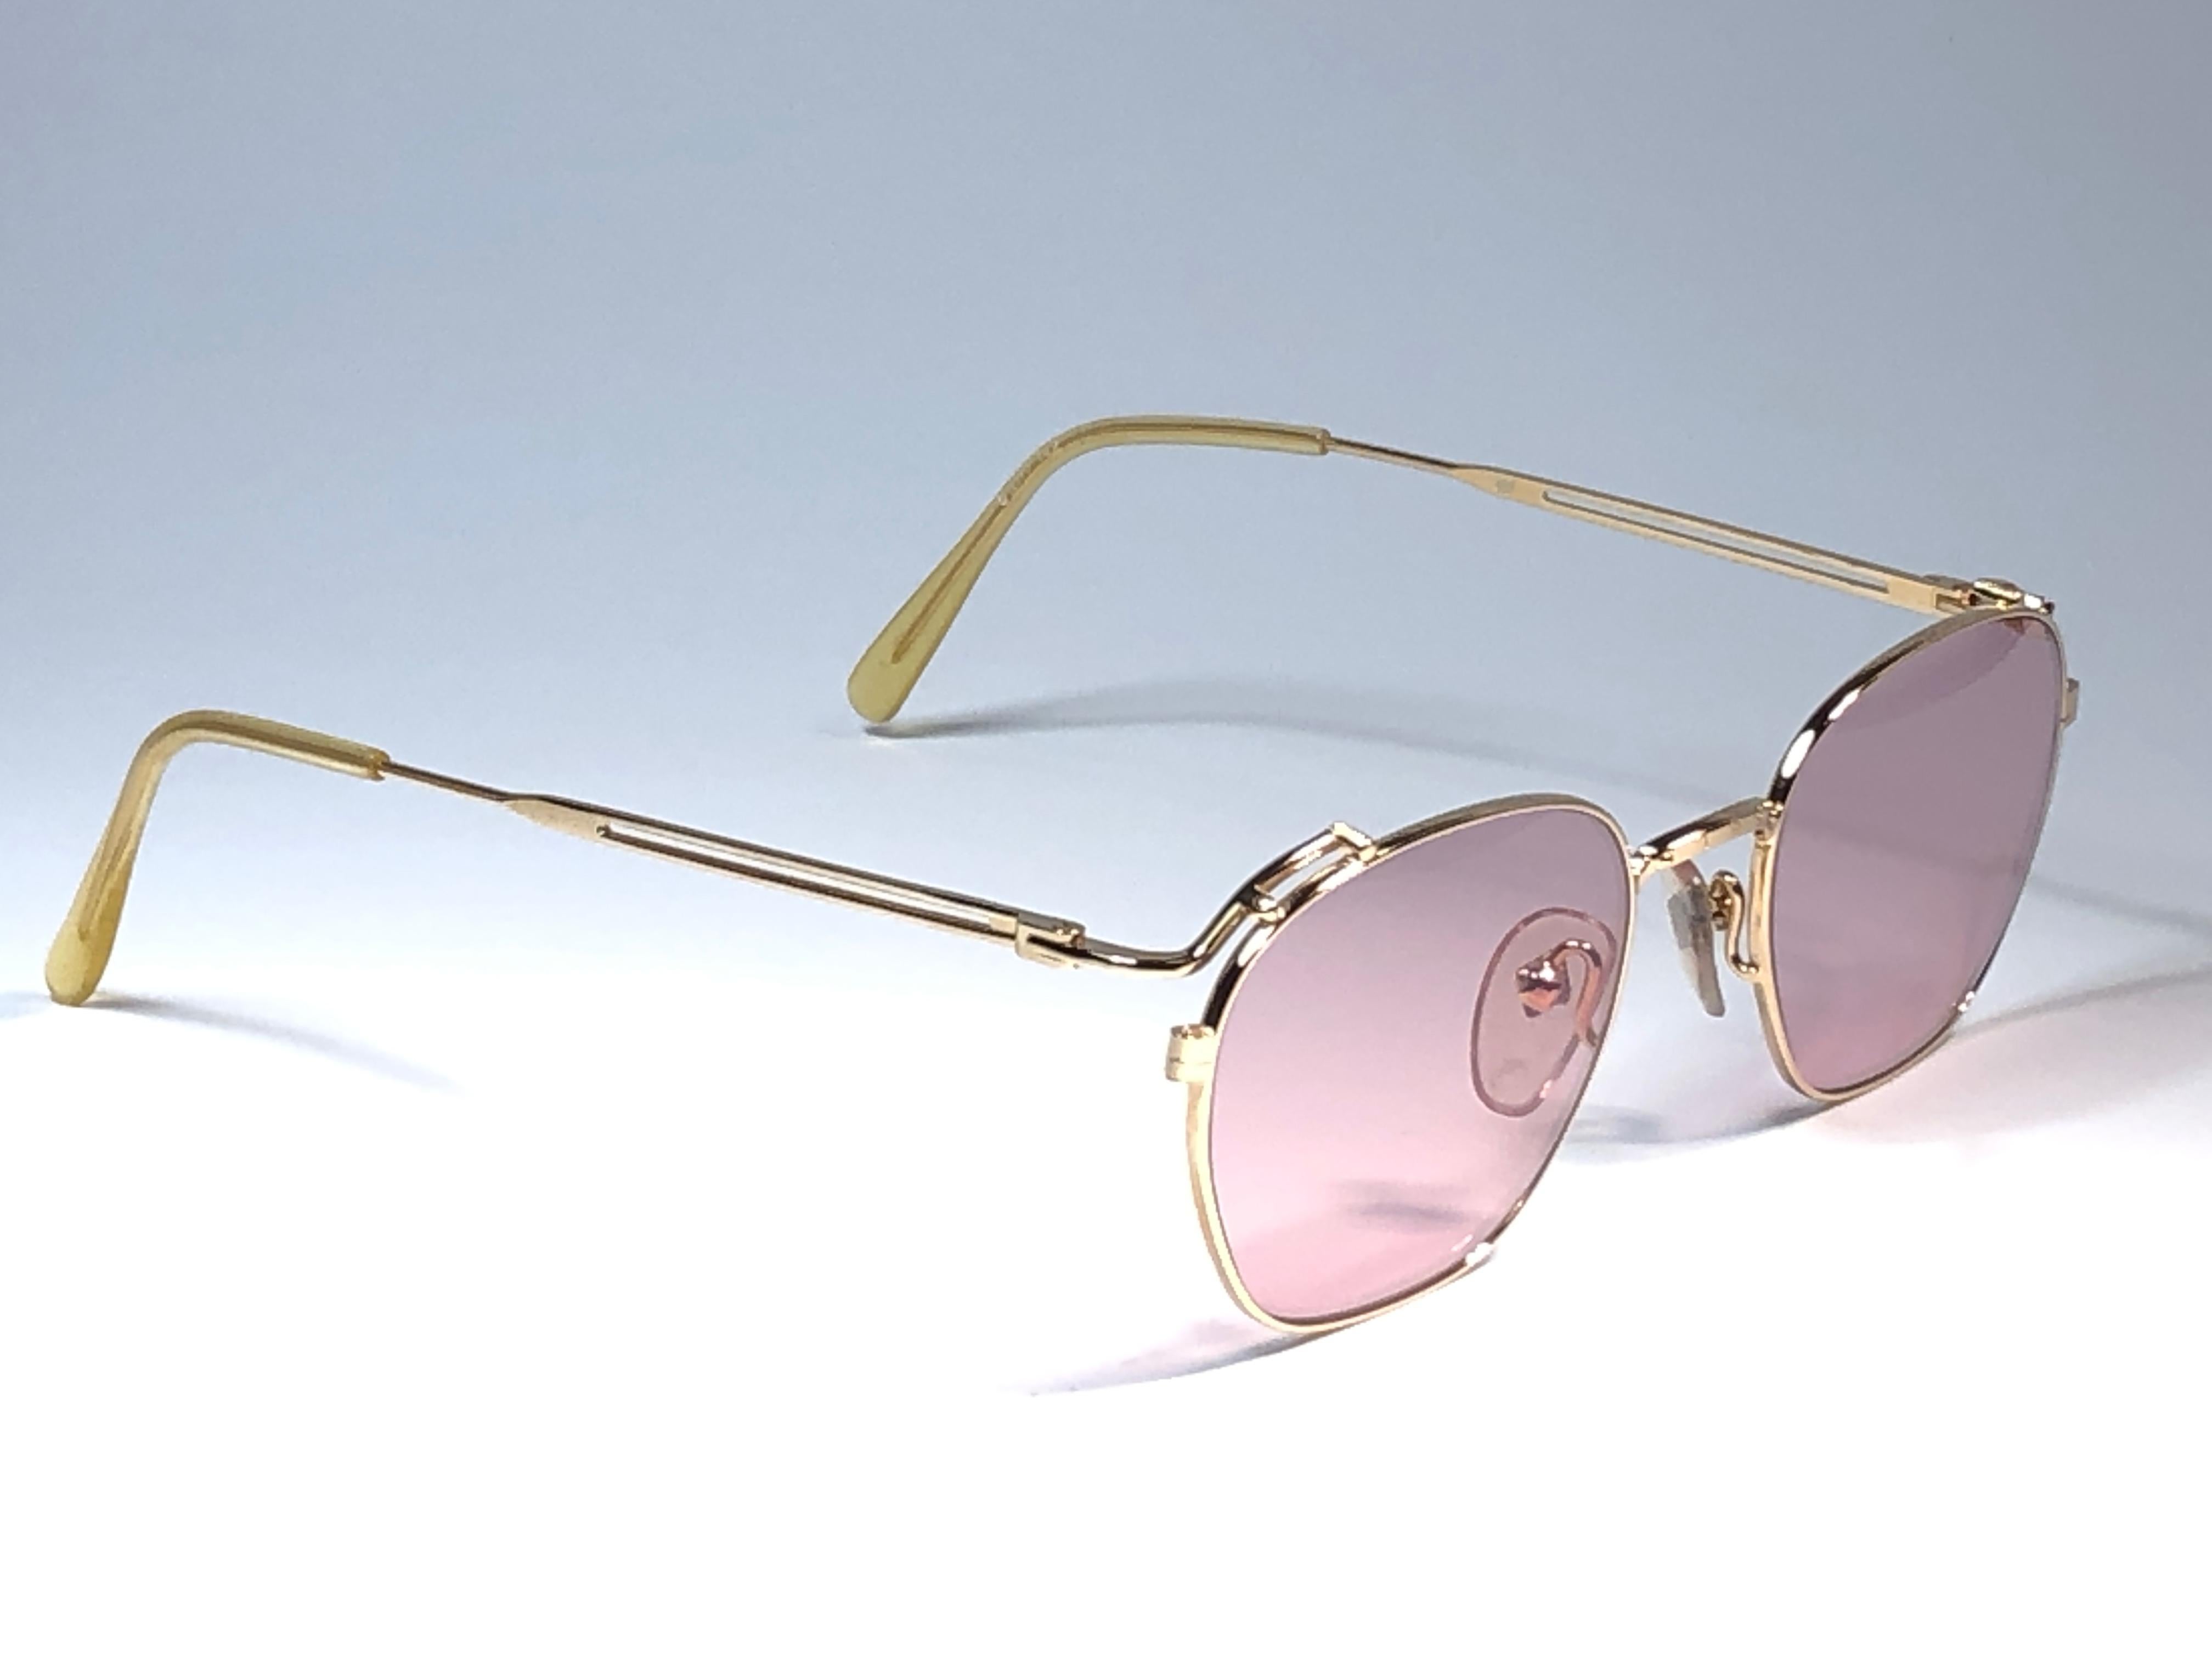 New Jean Paul Gaultier small oval gold frame. 
Spotless light mauve lenses that complete a ready to wear JPG look.

Amazing design with strong yet intricate details.
Design and produced in the 1990's.
New, never worn or displayed.
A true fashion